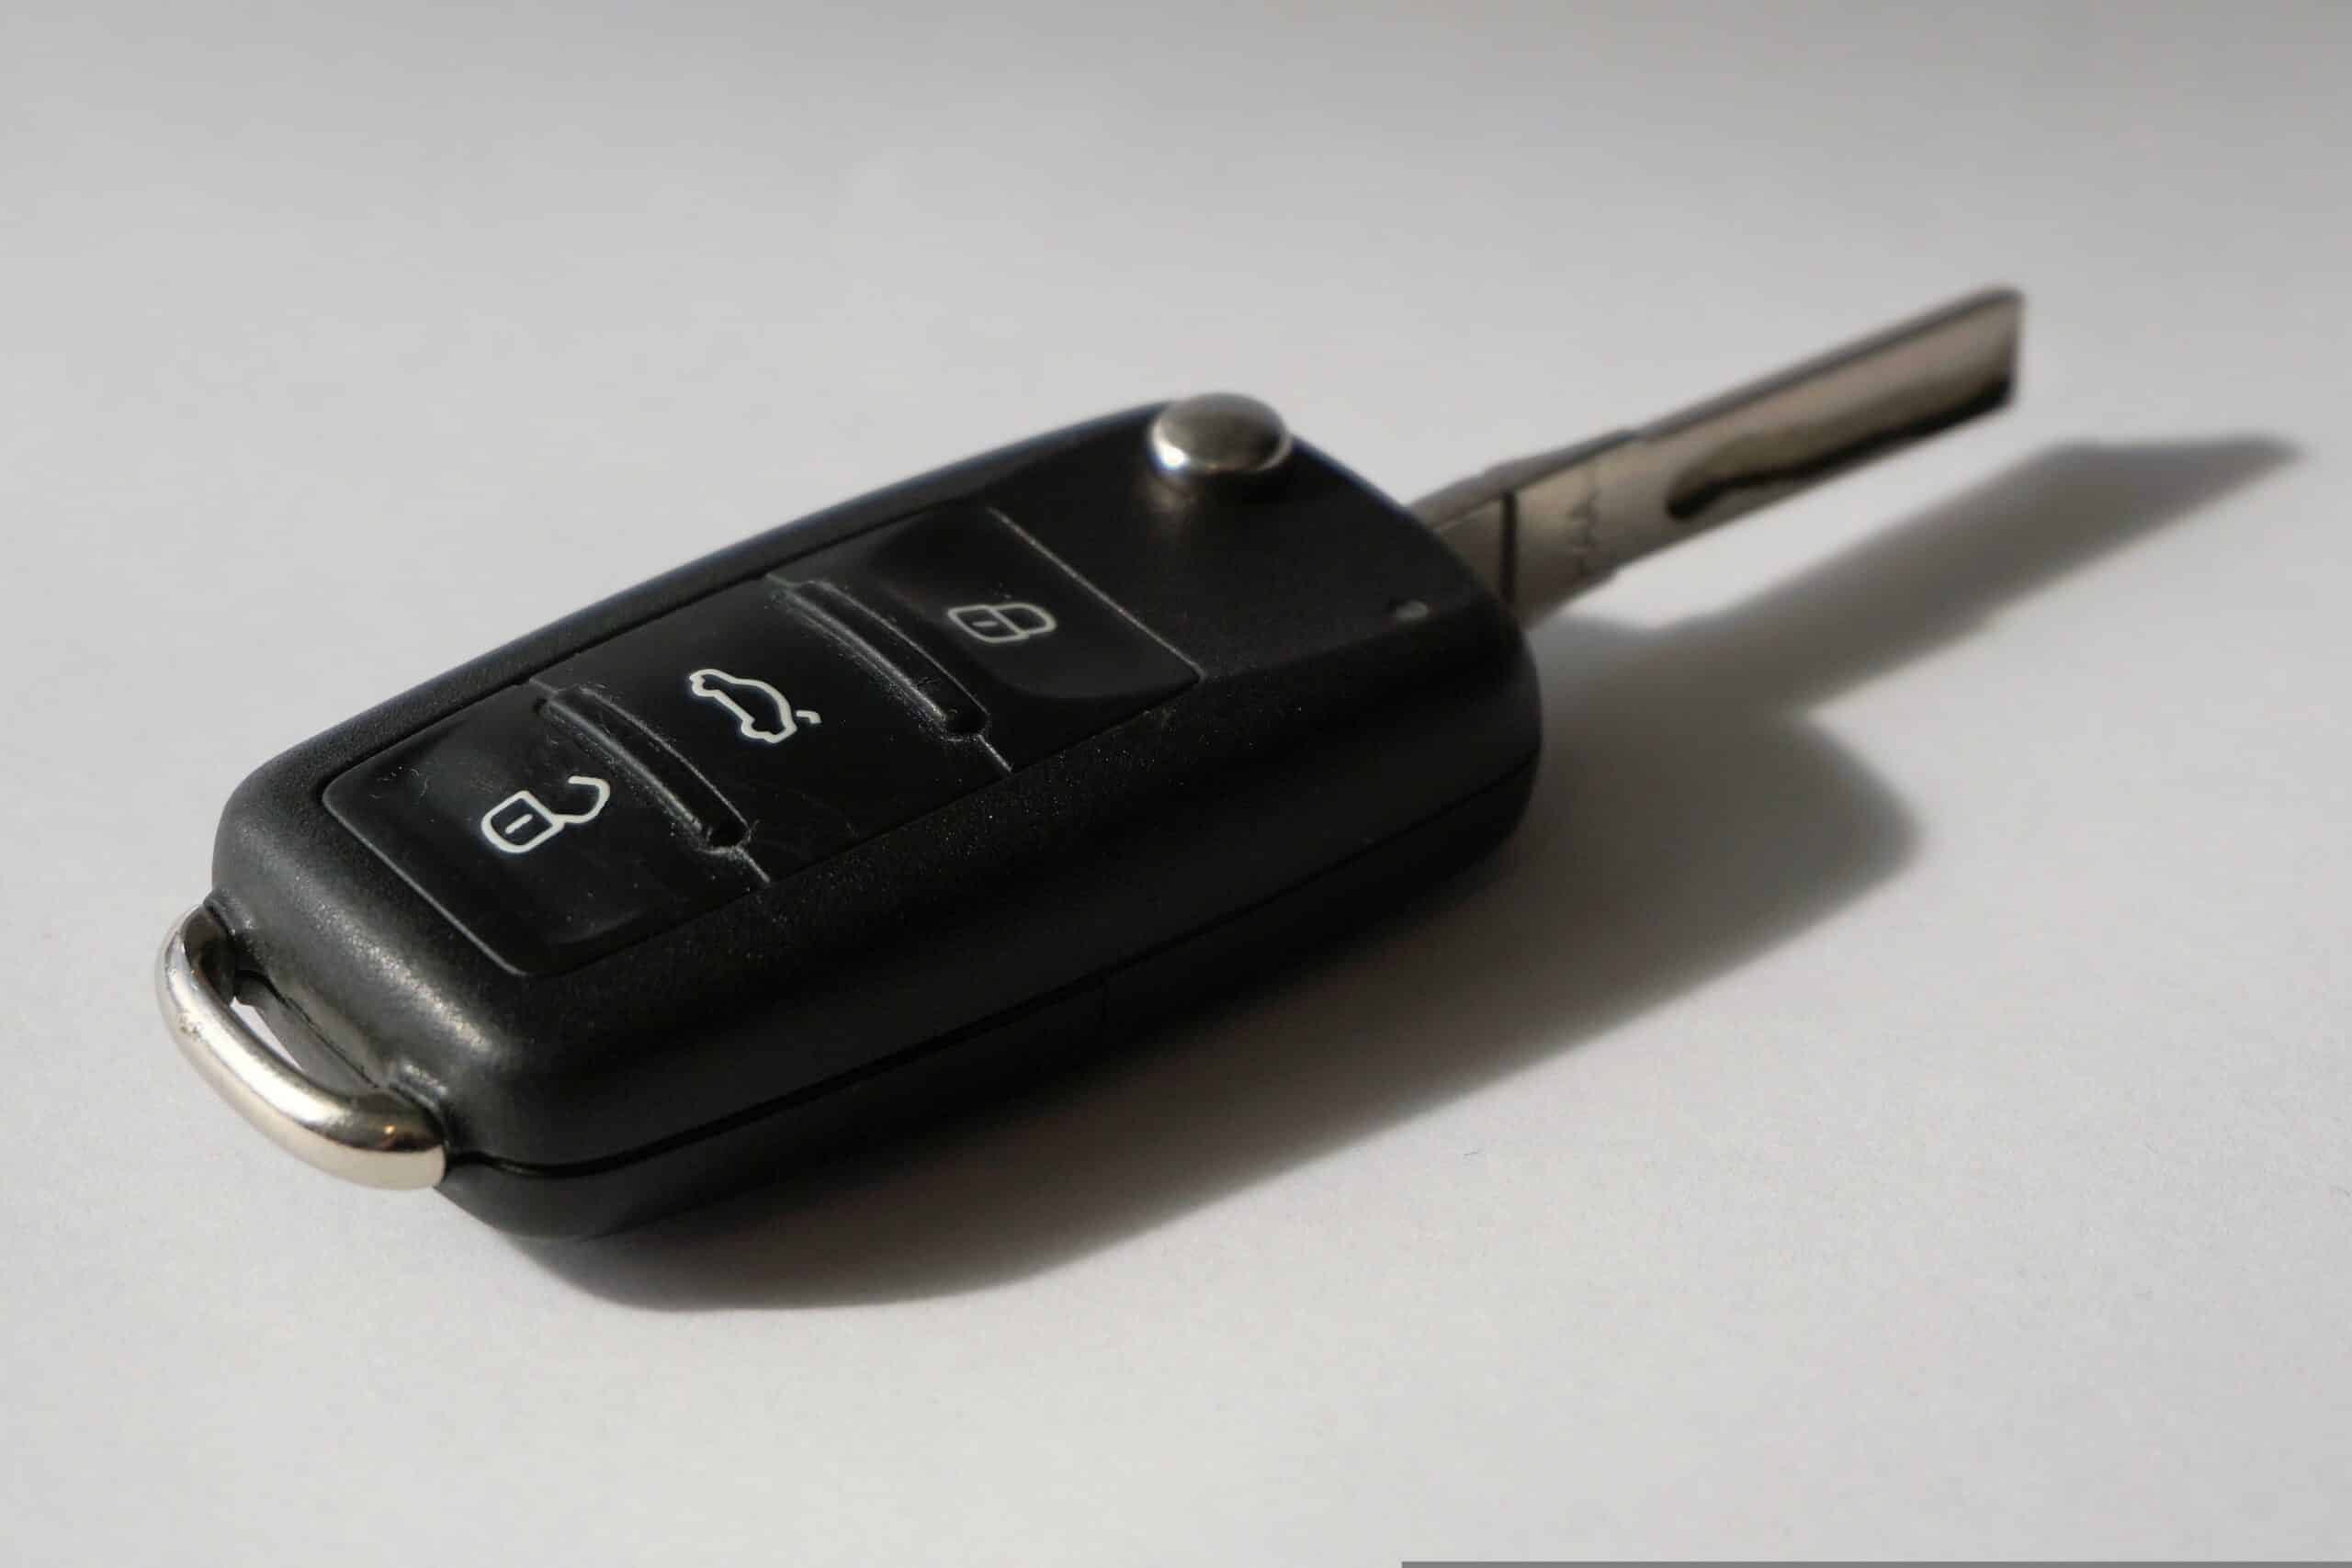 How to change battery in key fob